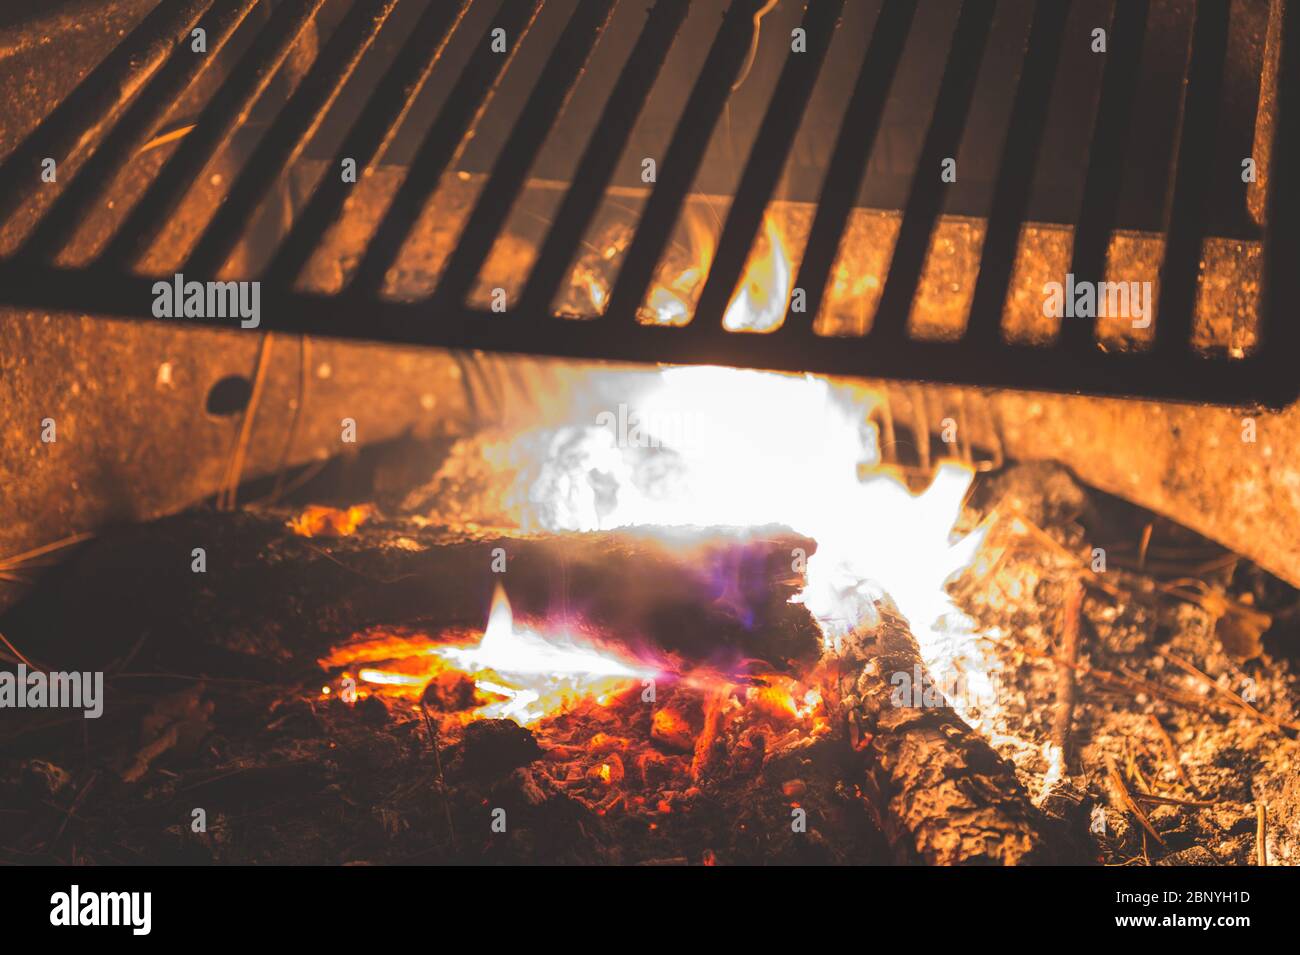 Stainless Steel BBQ Grill over bonfire im camp site in campground at night. Stock Photo